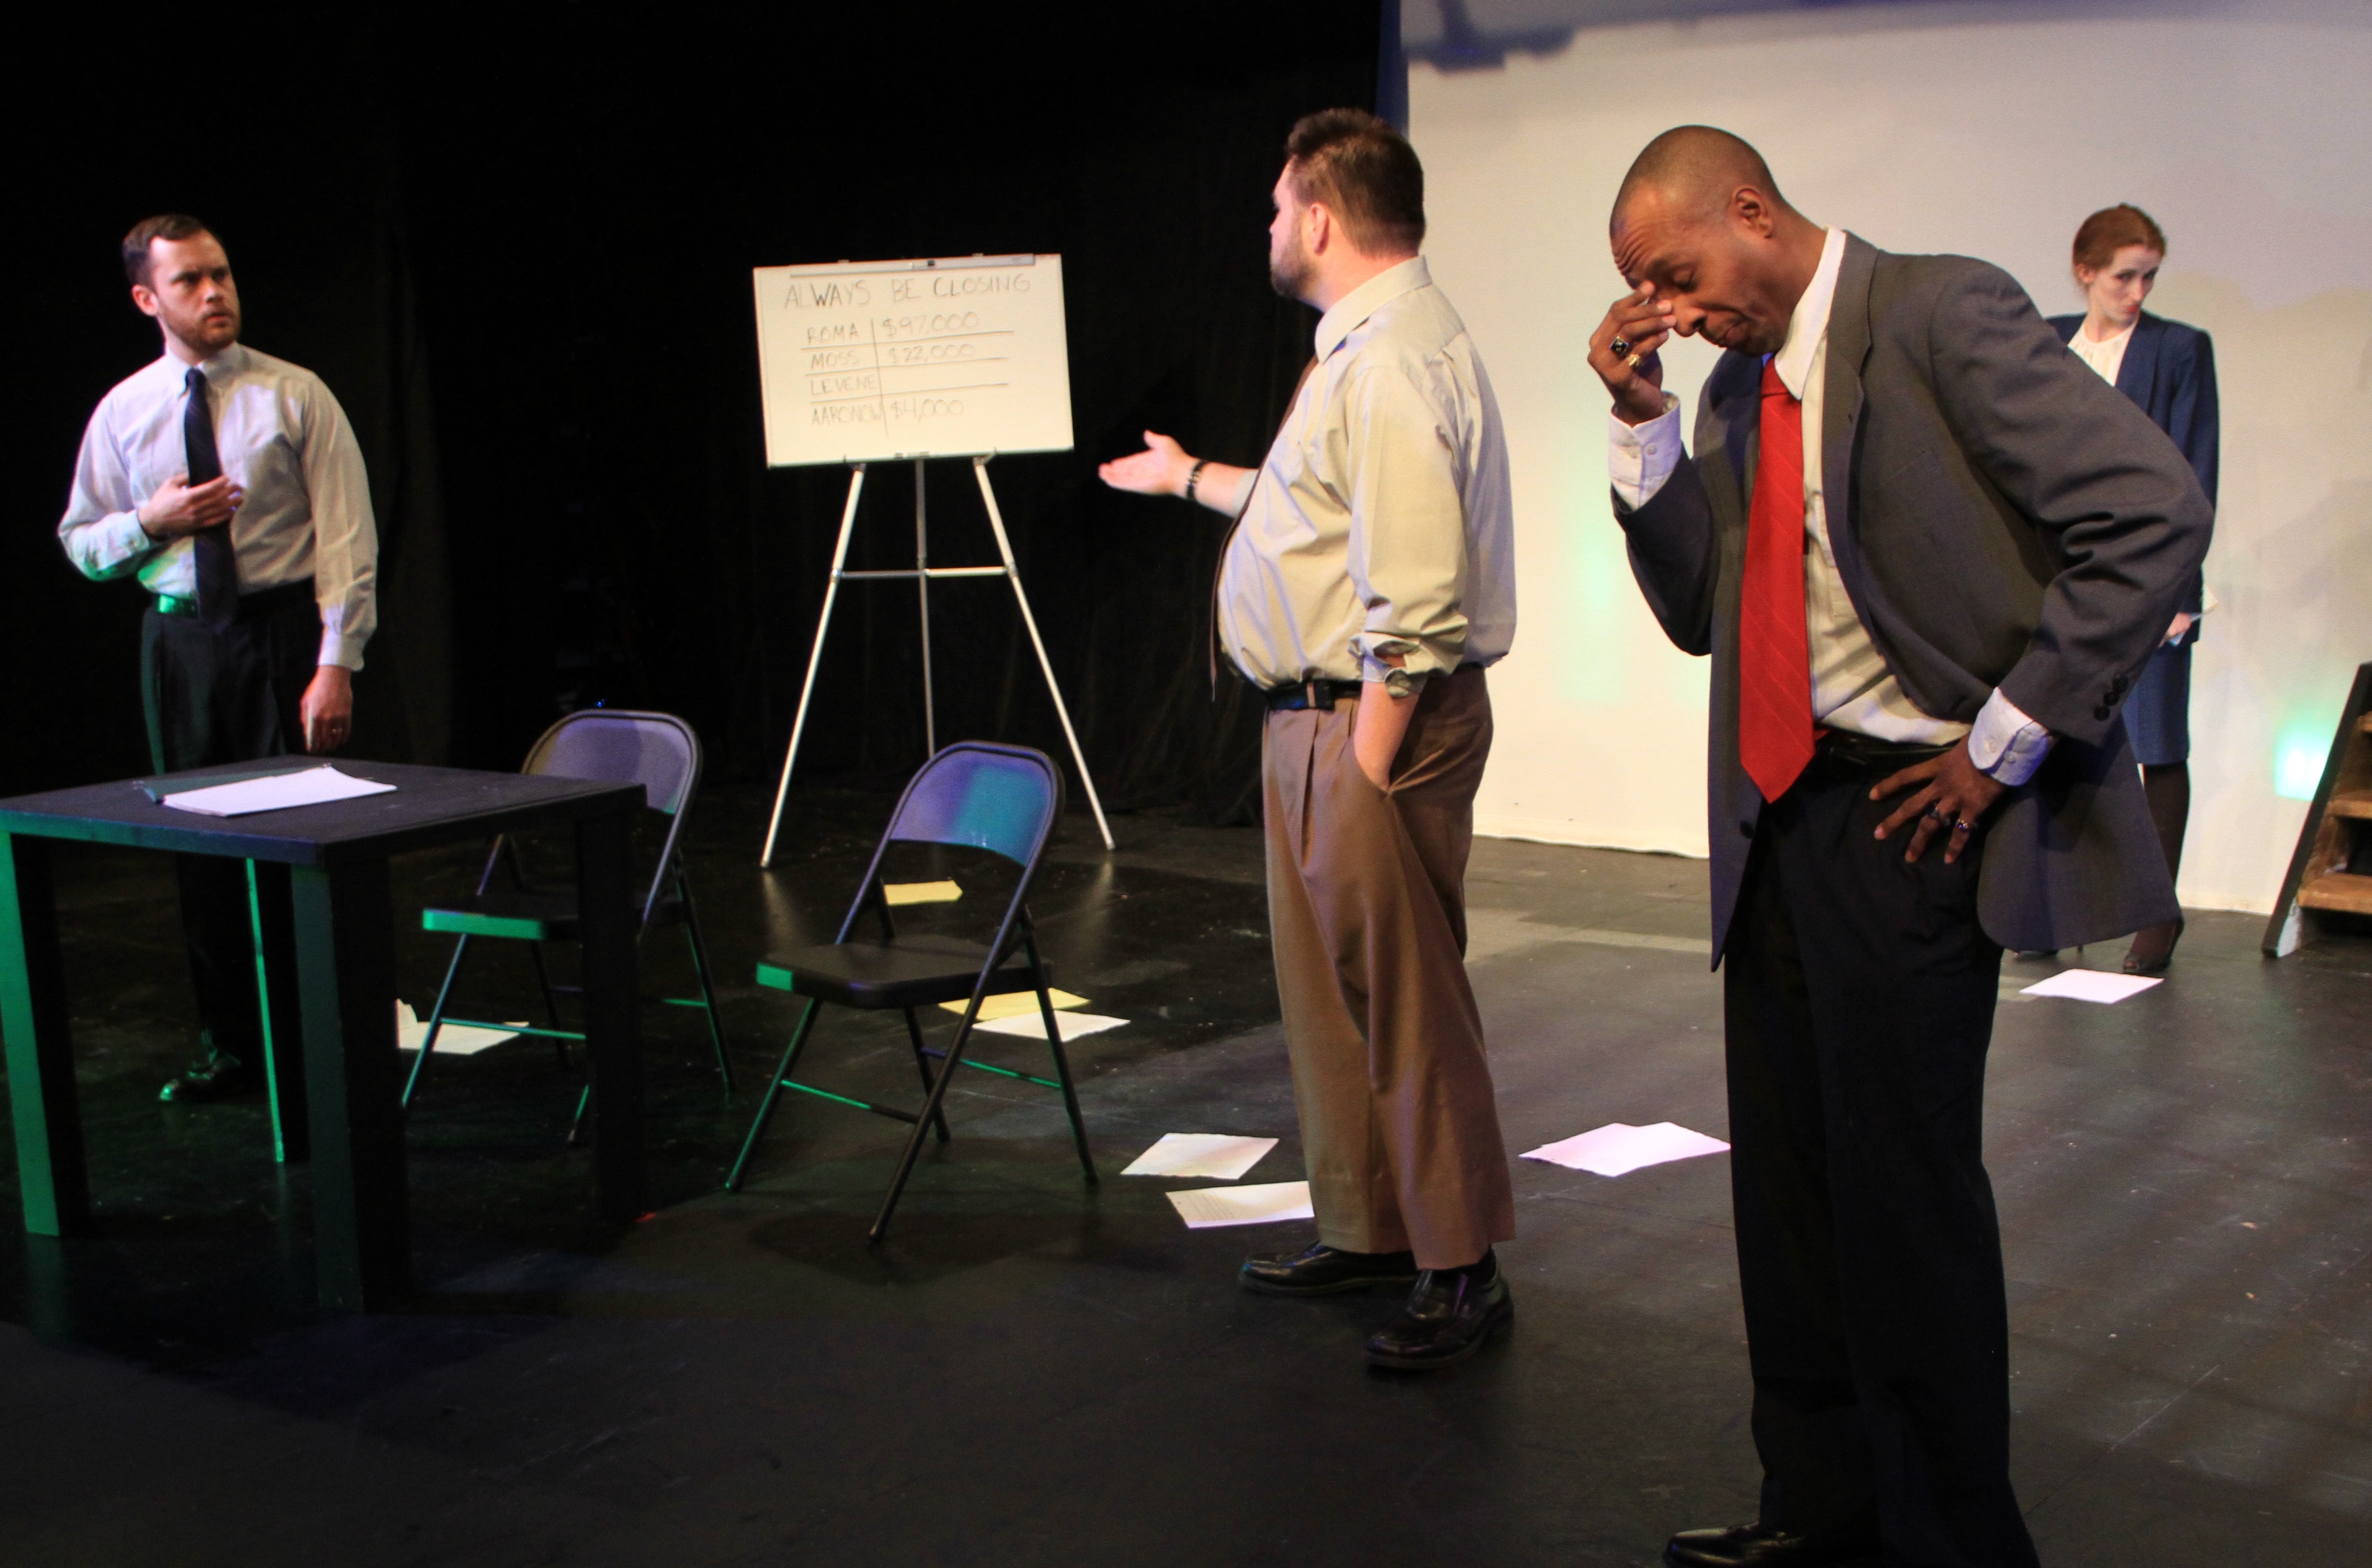 Review: ‘Glengarry Glen Ross’ escalates excellently with powerful performances